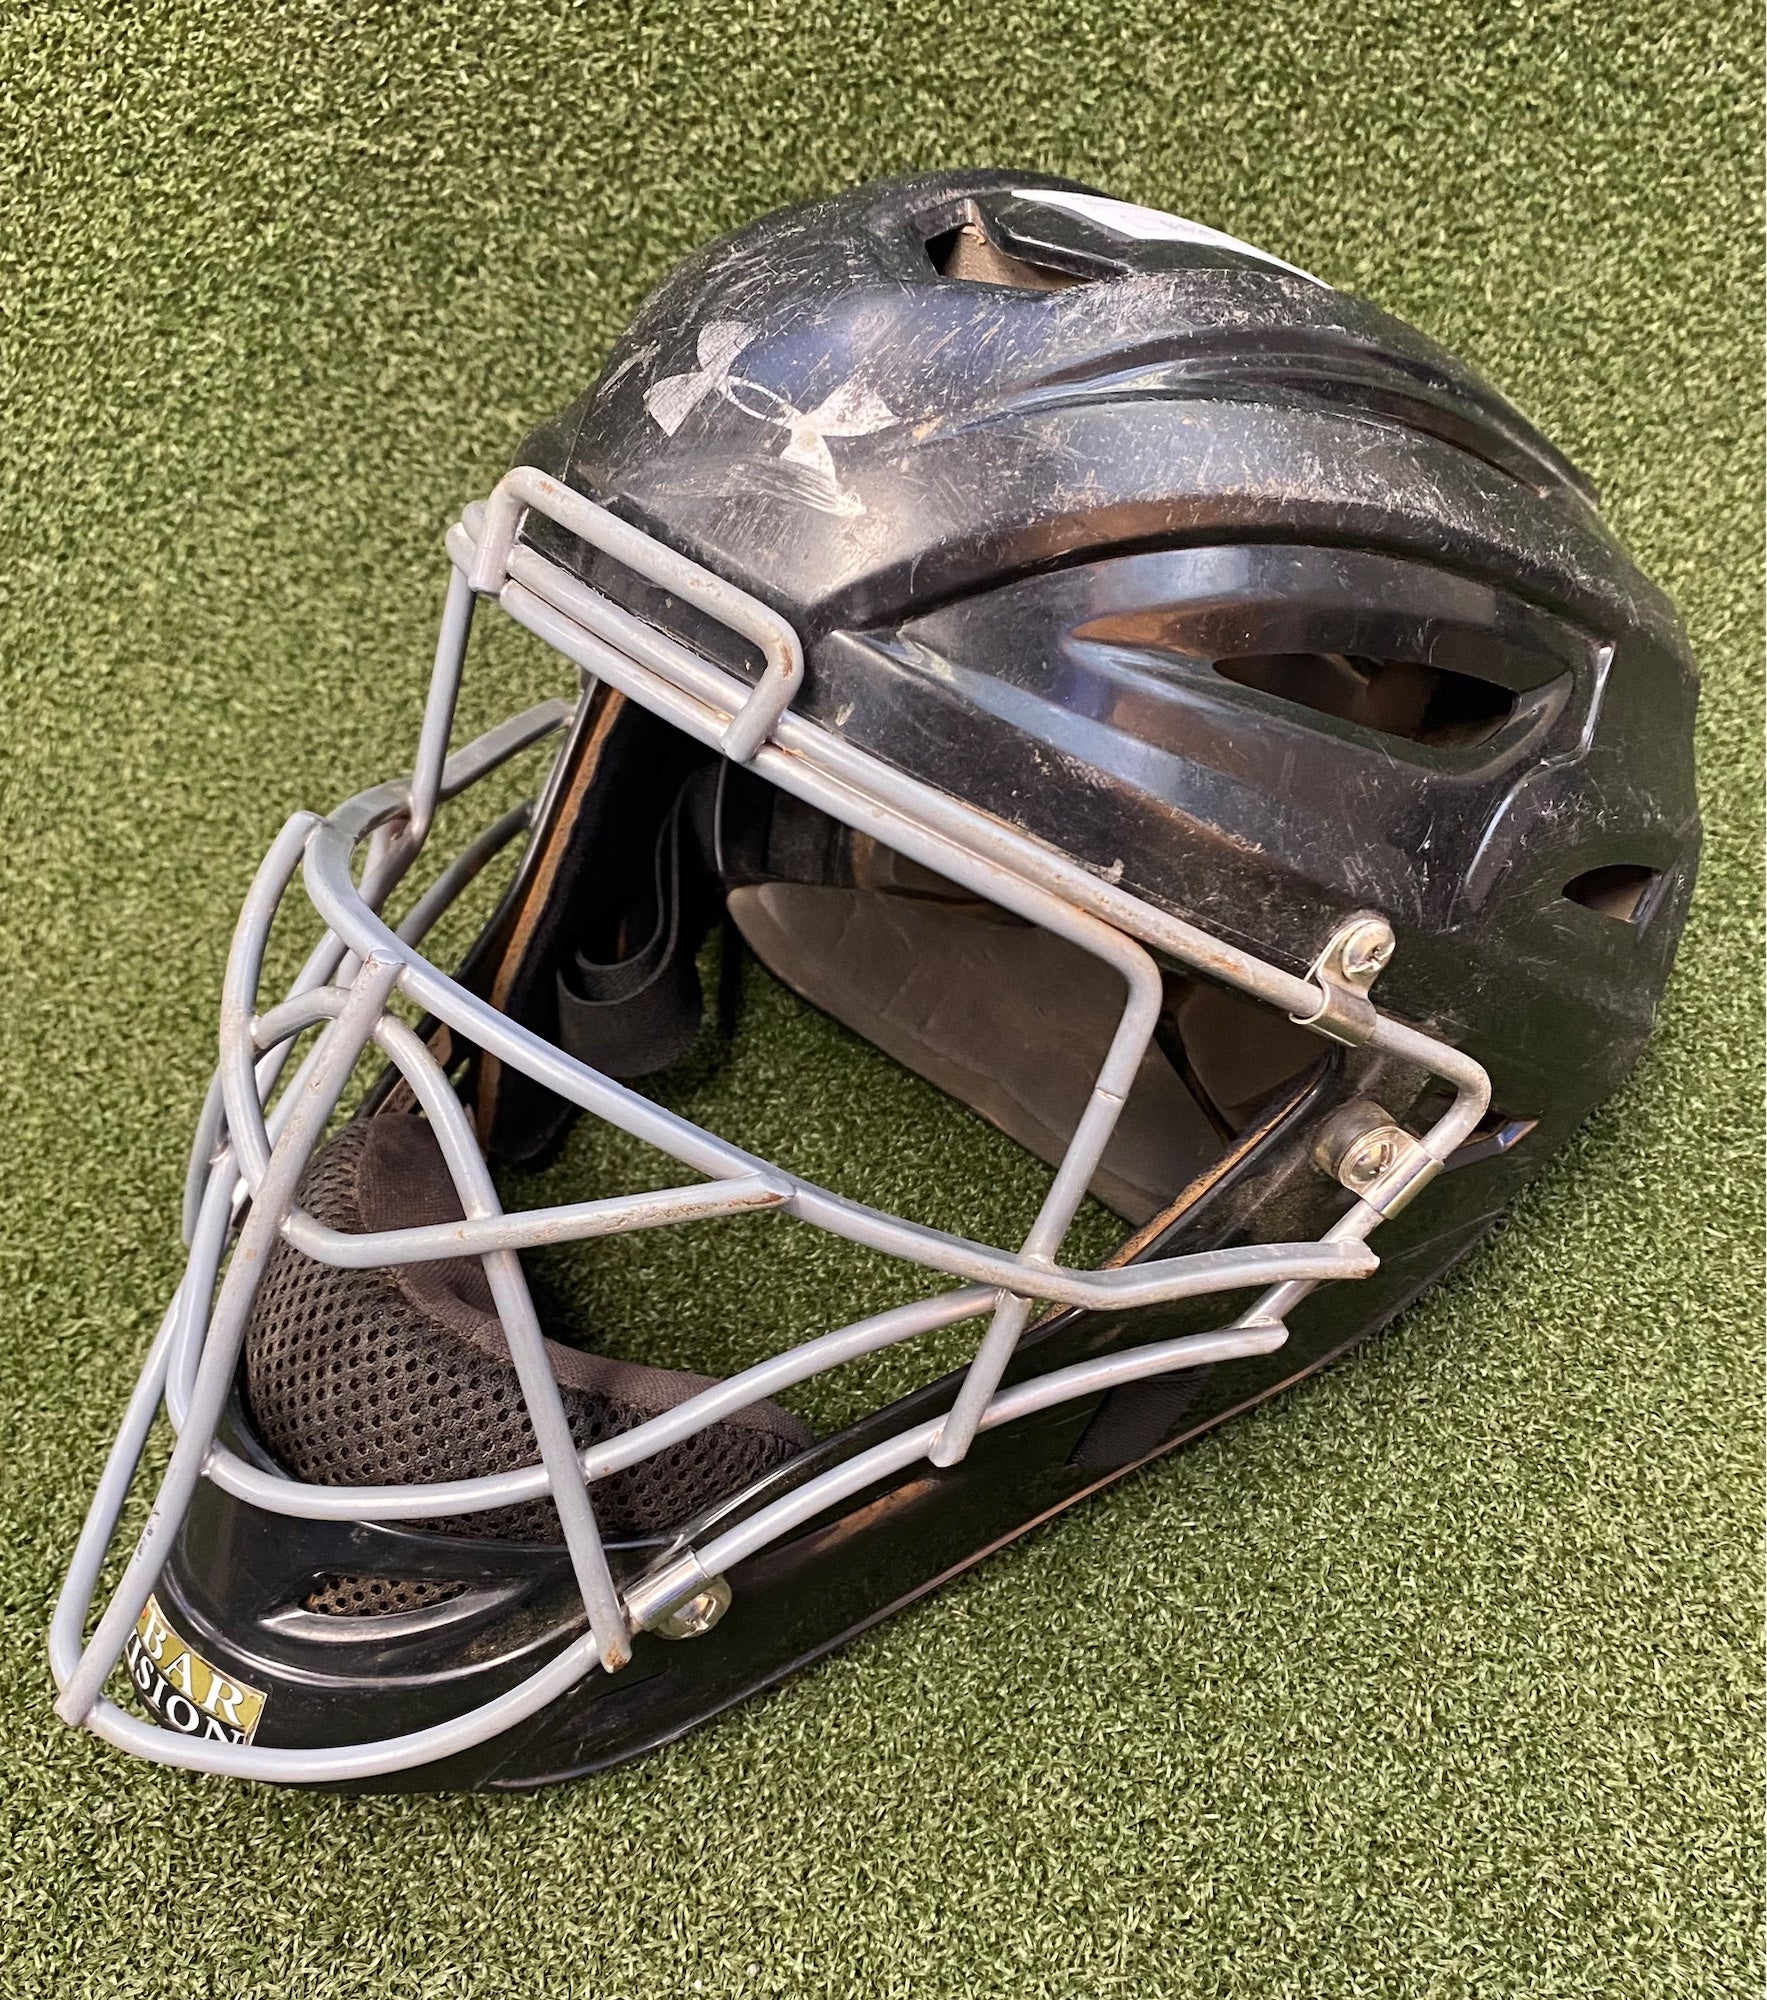 Under Armour Baseball Porn - Under Armour Catcher's Mask (9493) | SidelineSwap